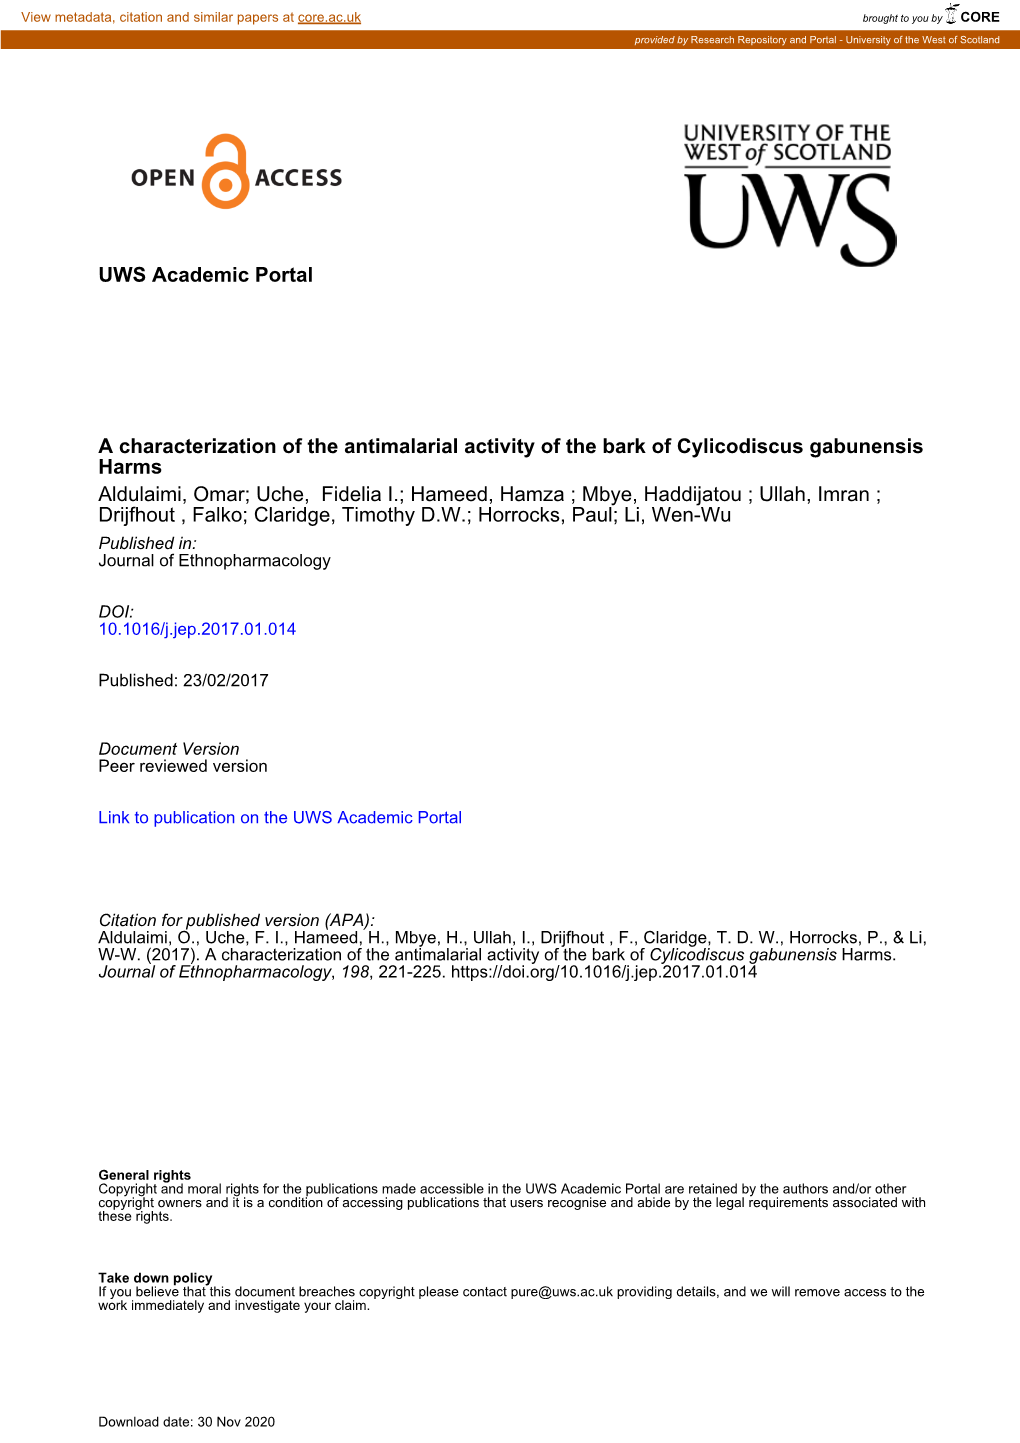 UWS Academic Portal a Characterization of the Antimalarial